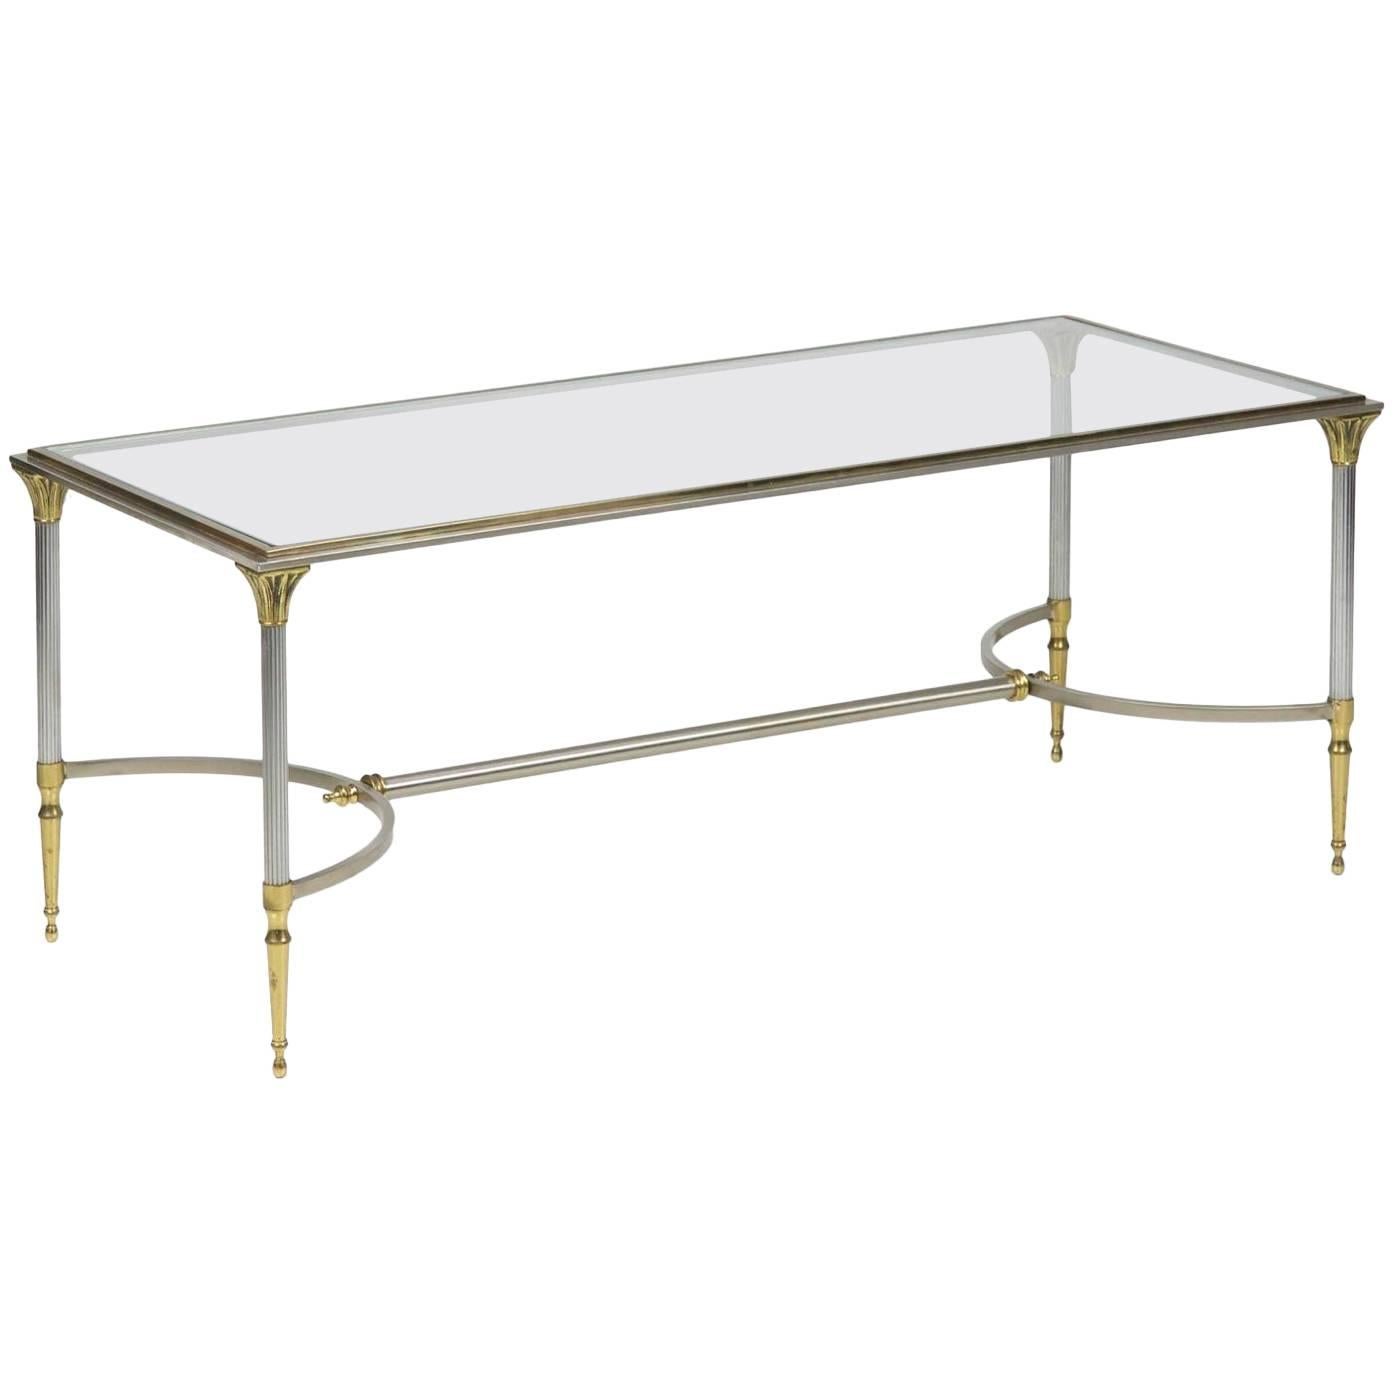 Neoclassical Style Steel, Brass and Glass Low Table in Manner of Maison Jansen